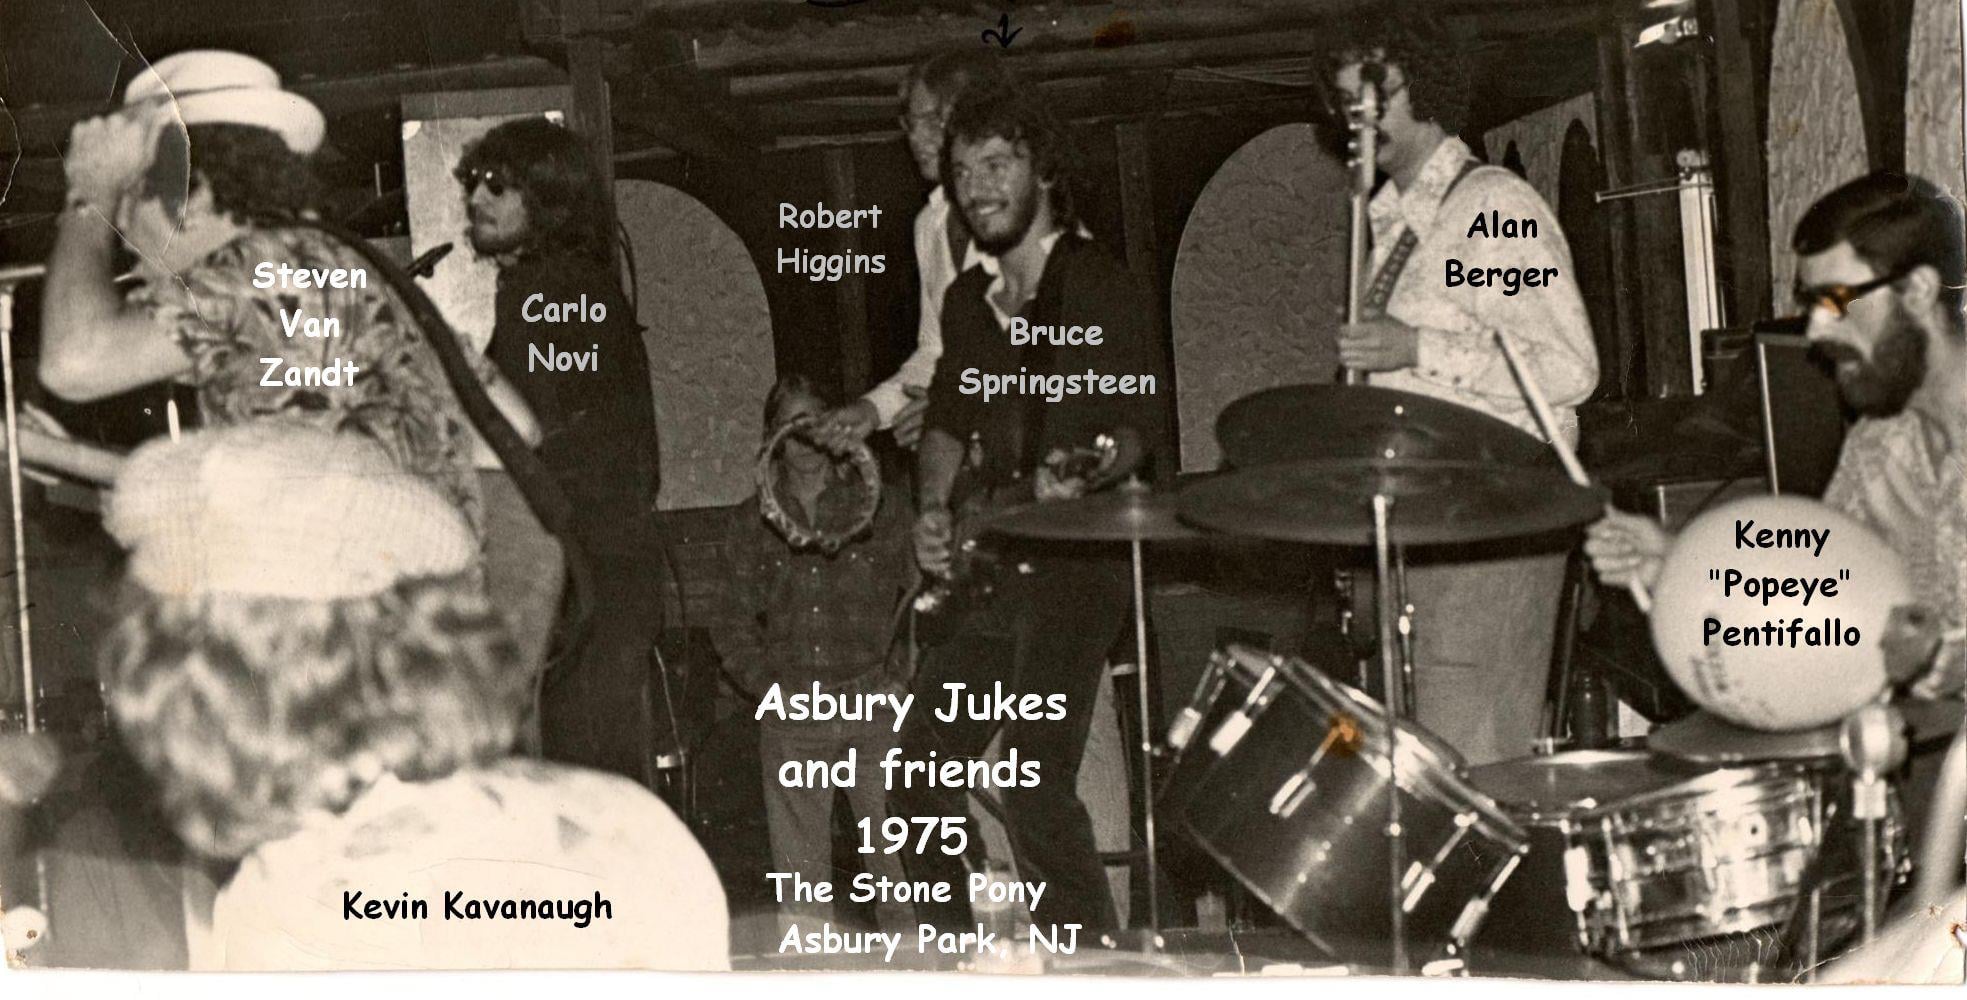 Southside Johnny and the Asbury Jukes 1975